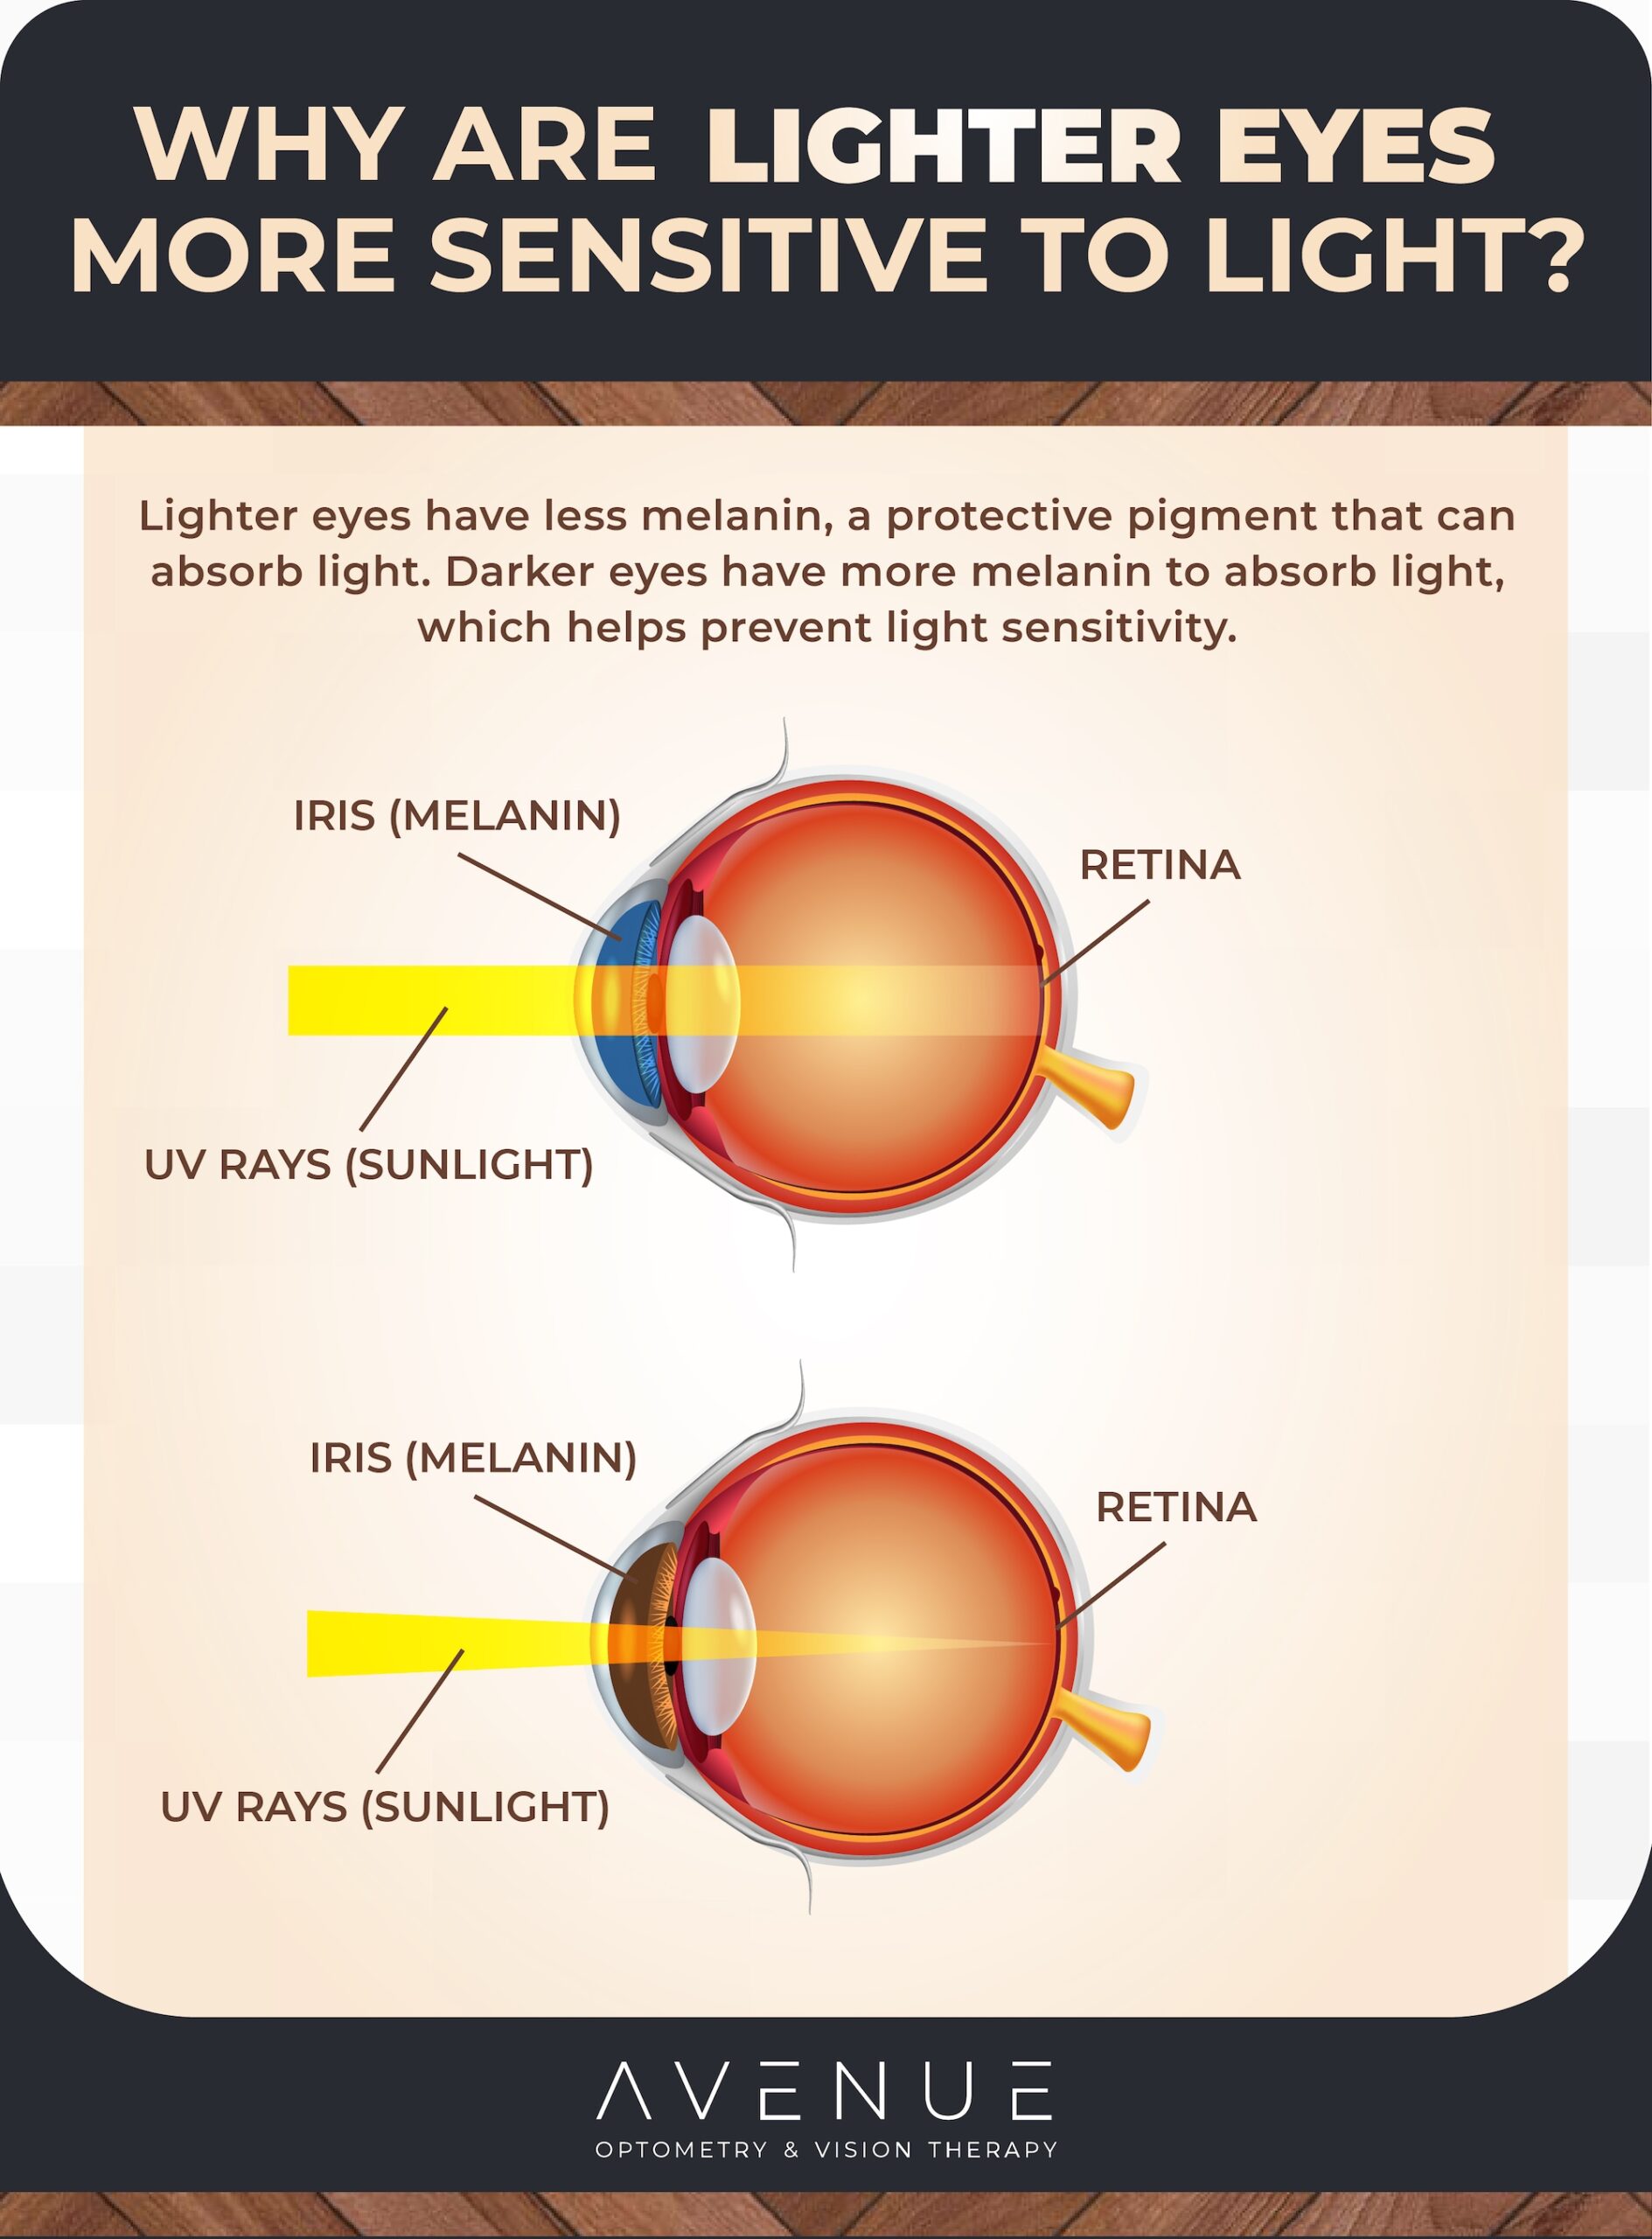 Infographic of two eye cross sections showing how the amount of melanin affects the strength of light entering the eye.